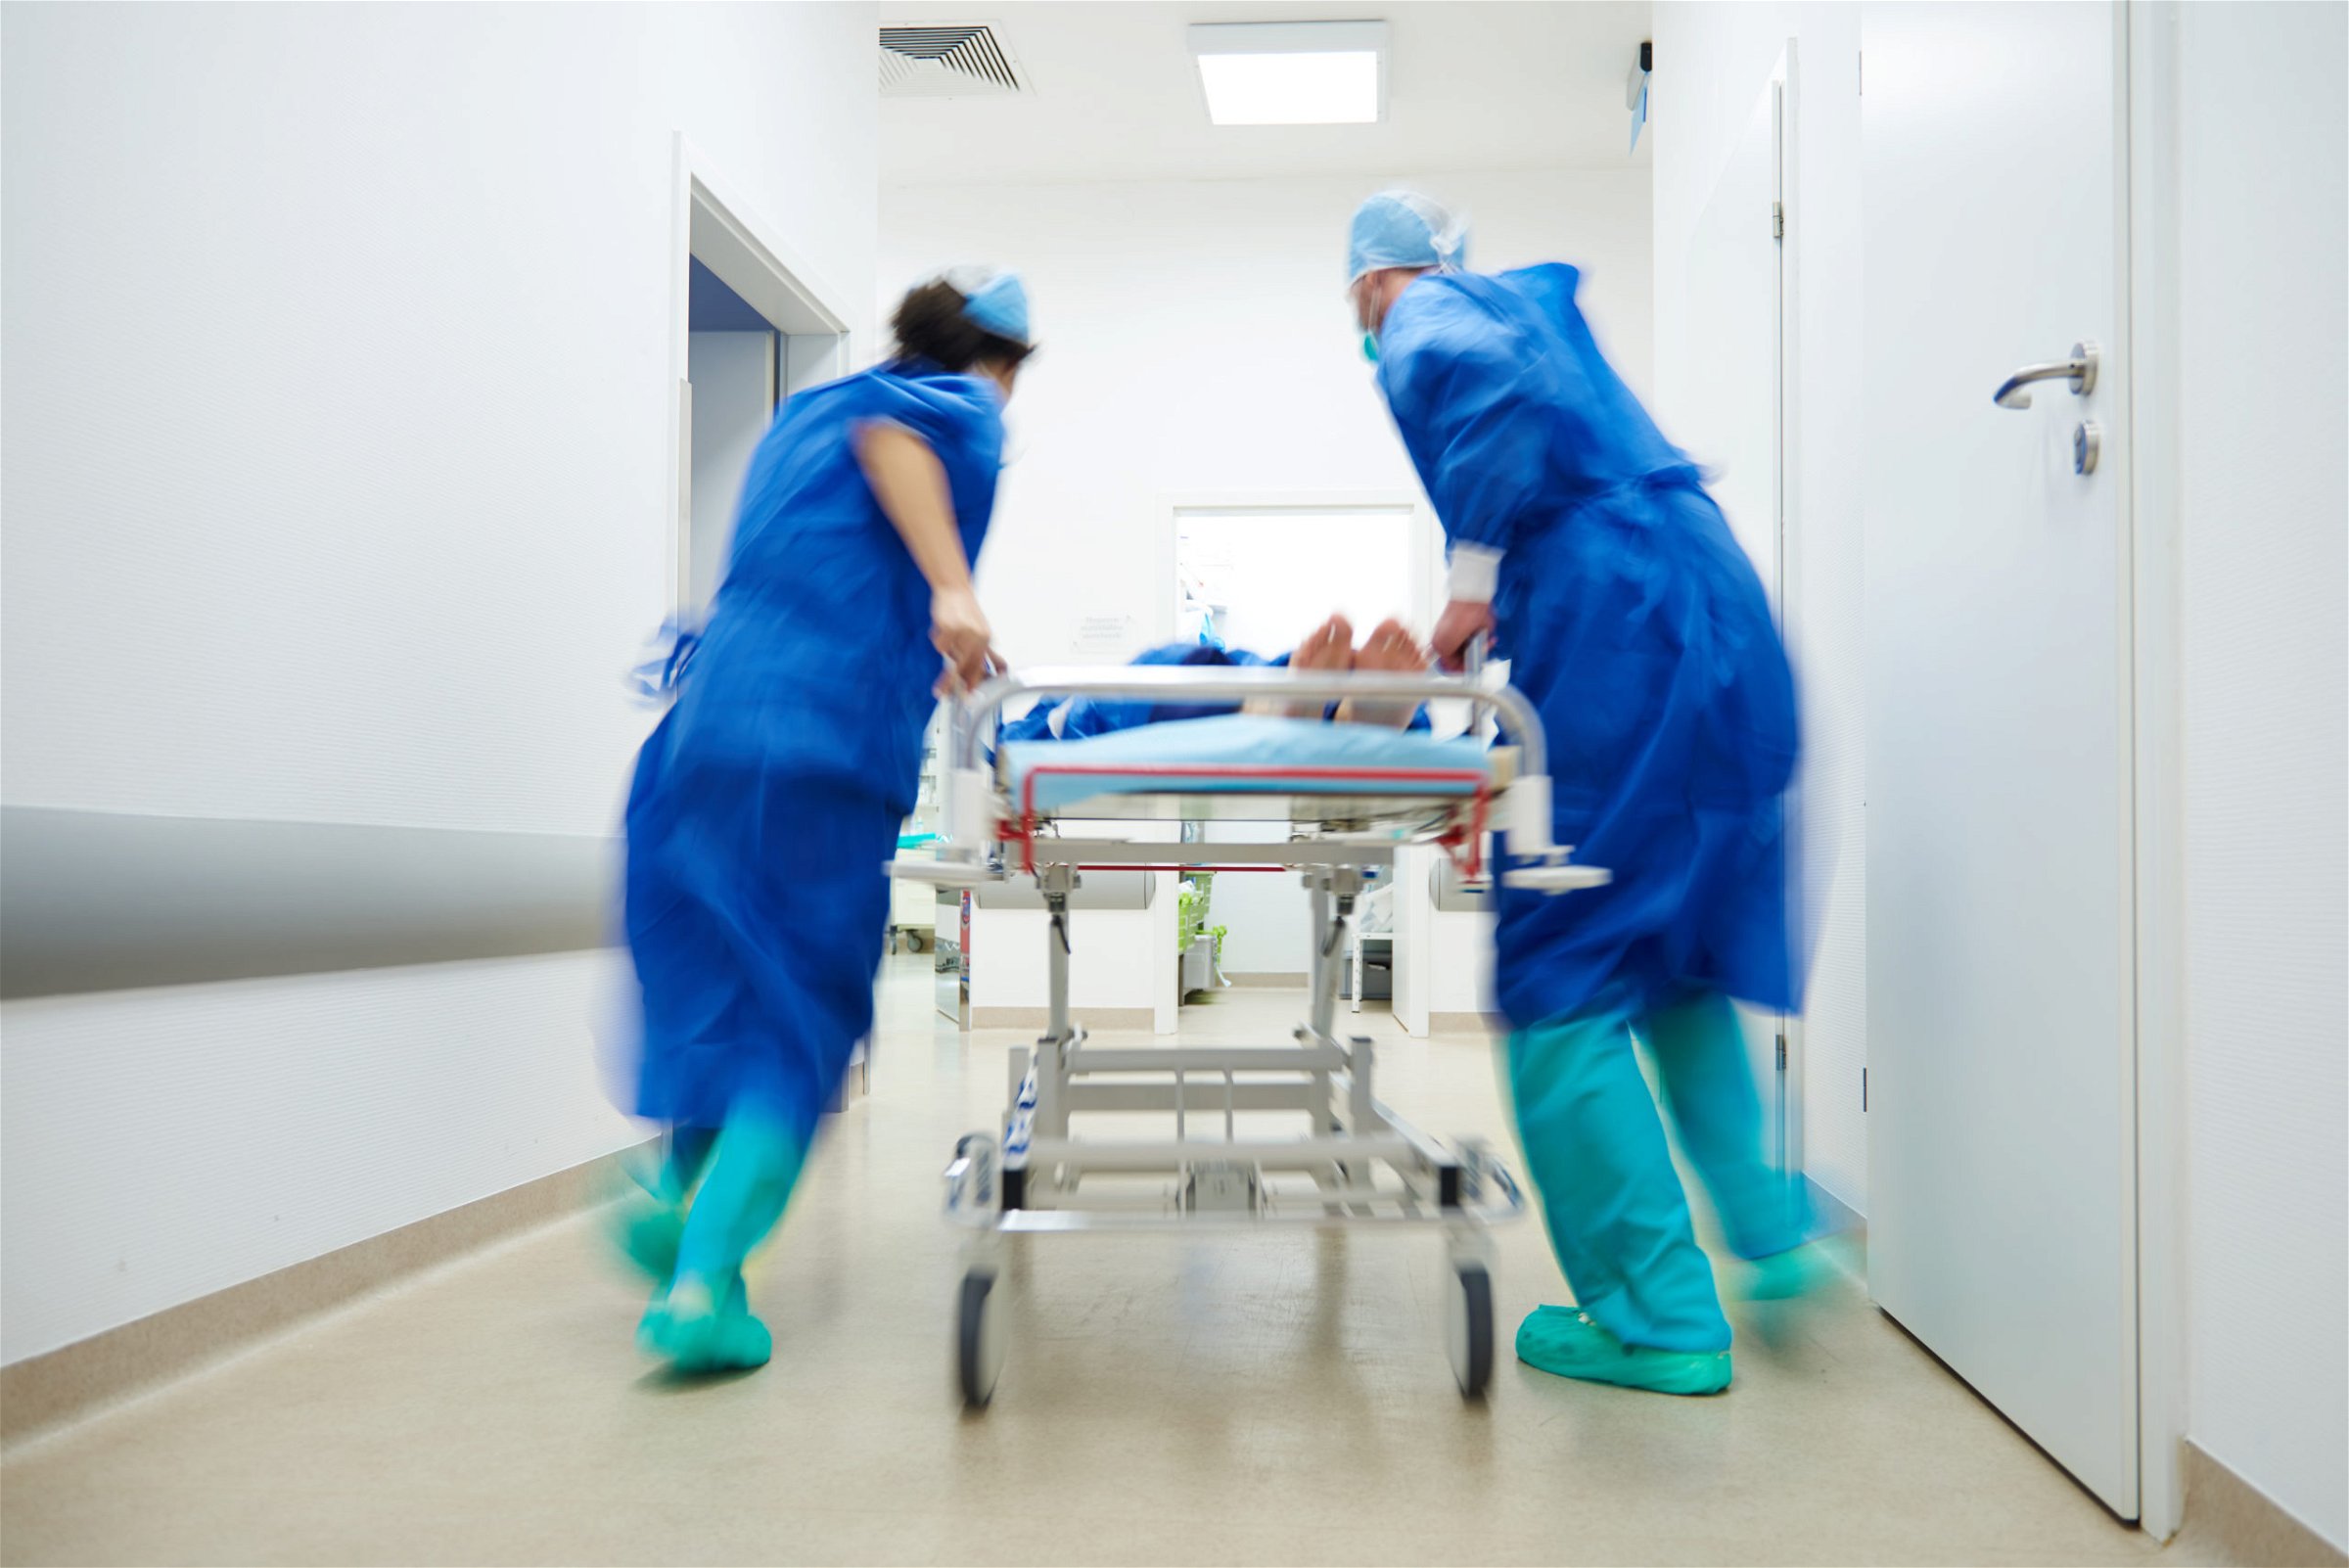 If an ER misdiagnosis has harmed you, you may be able to obtain substantial compensation for your injuries.